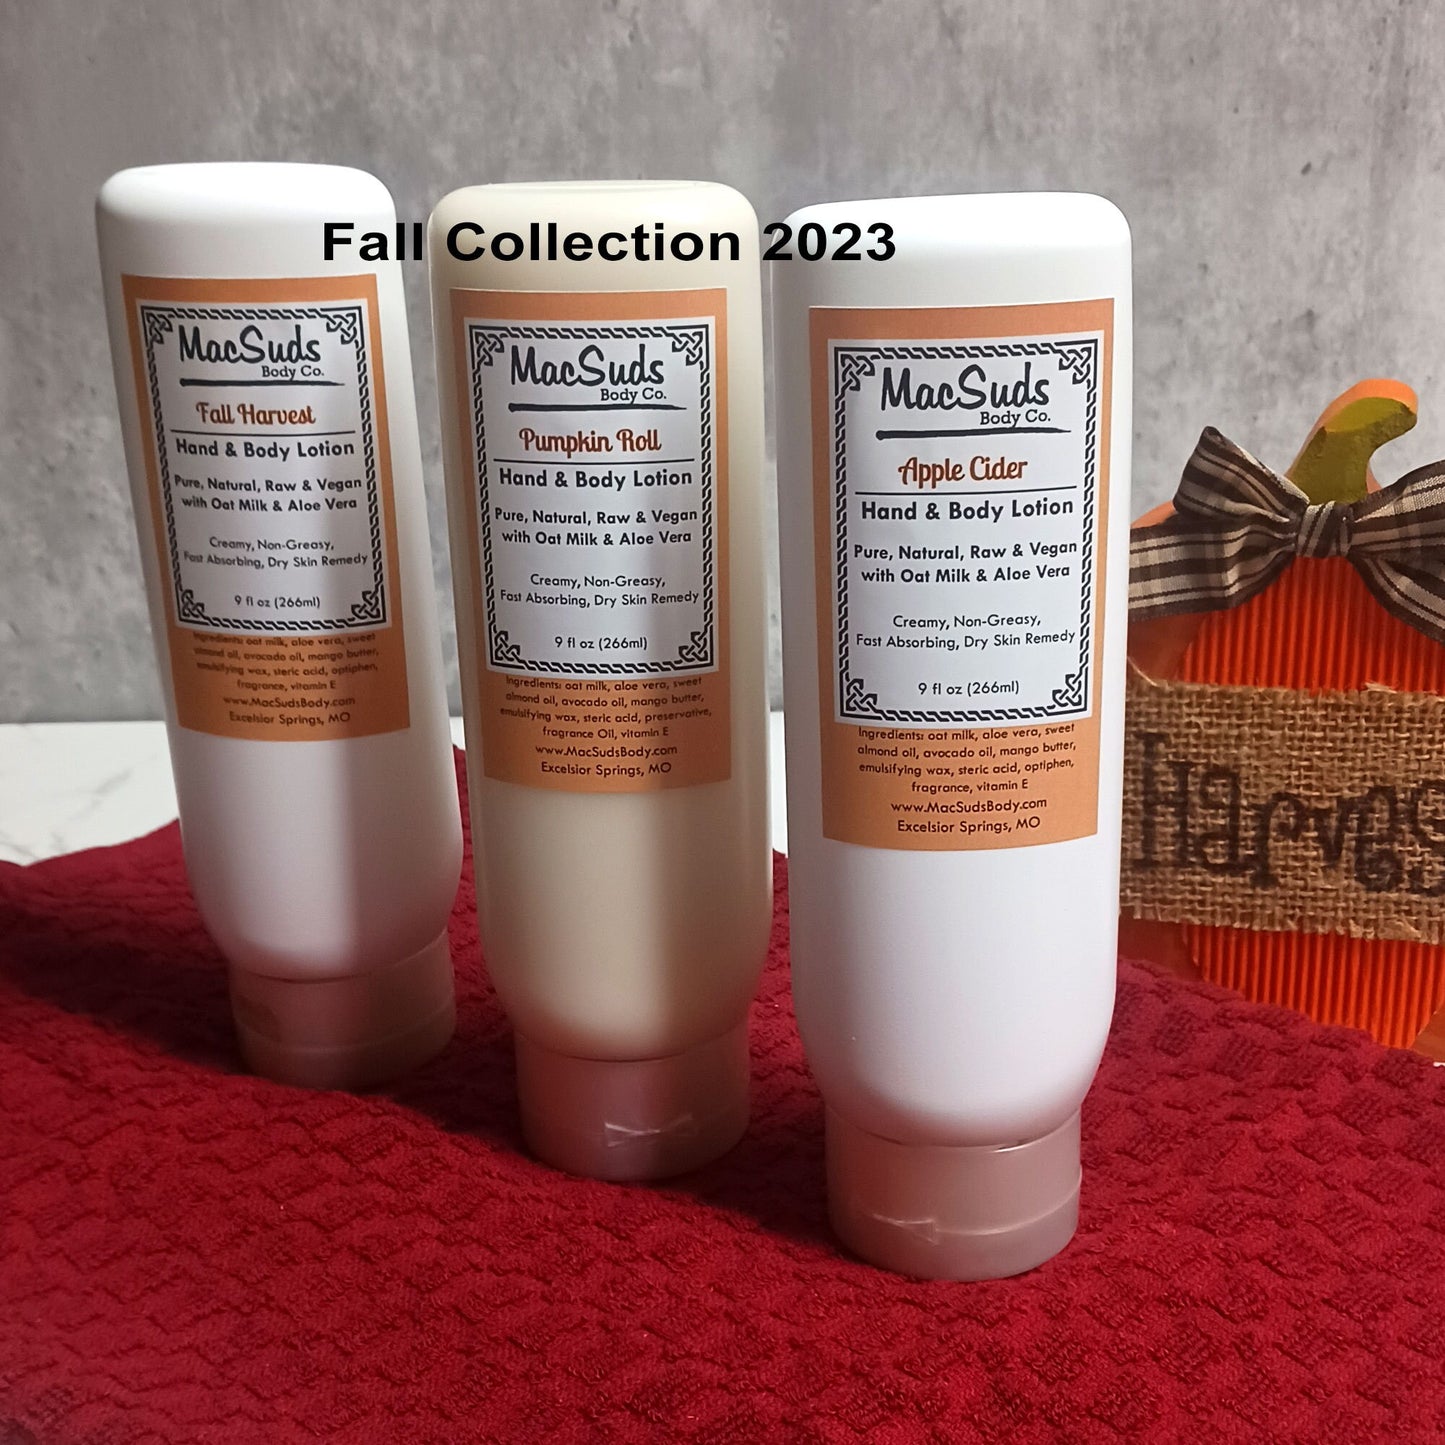 Apple Cider Hand and Body Moisturizing Lotion with Oak Milk